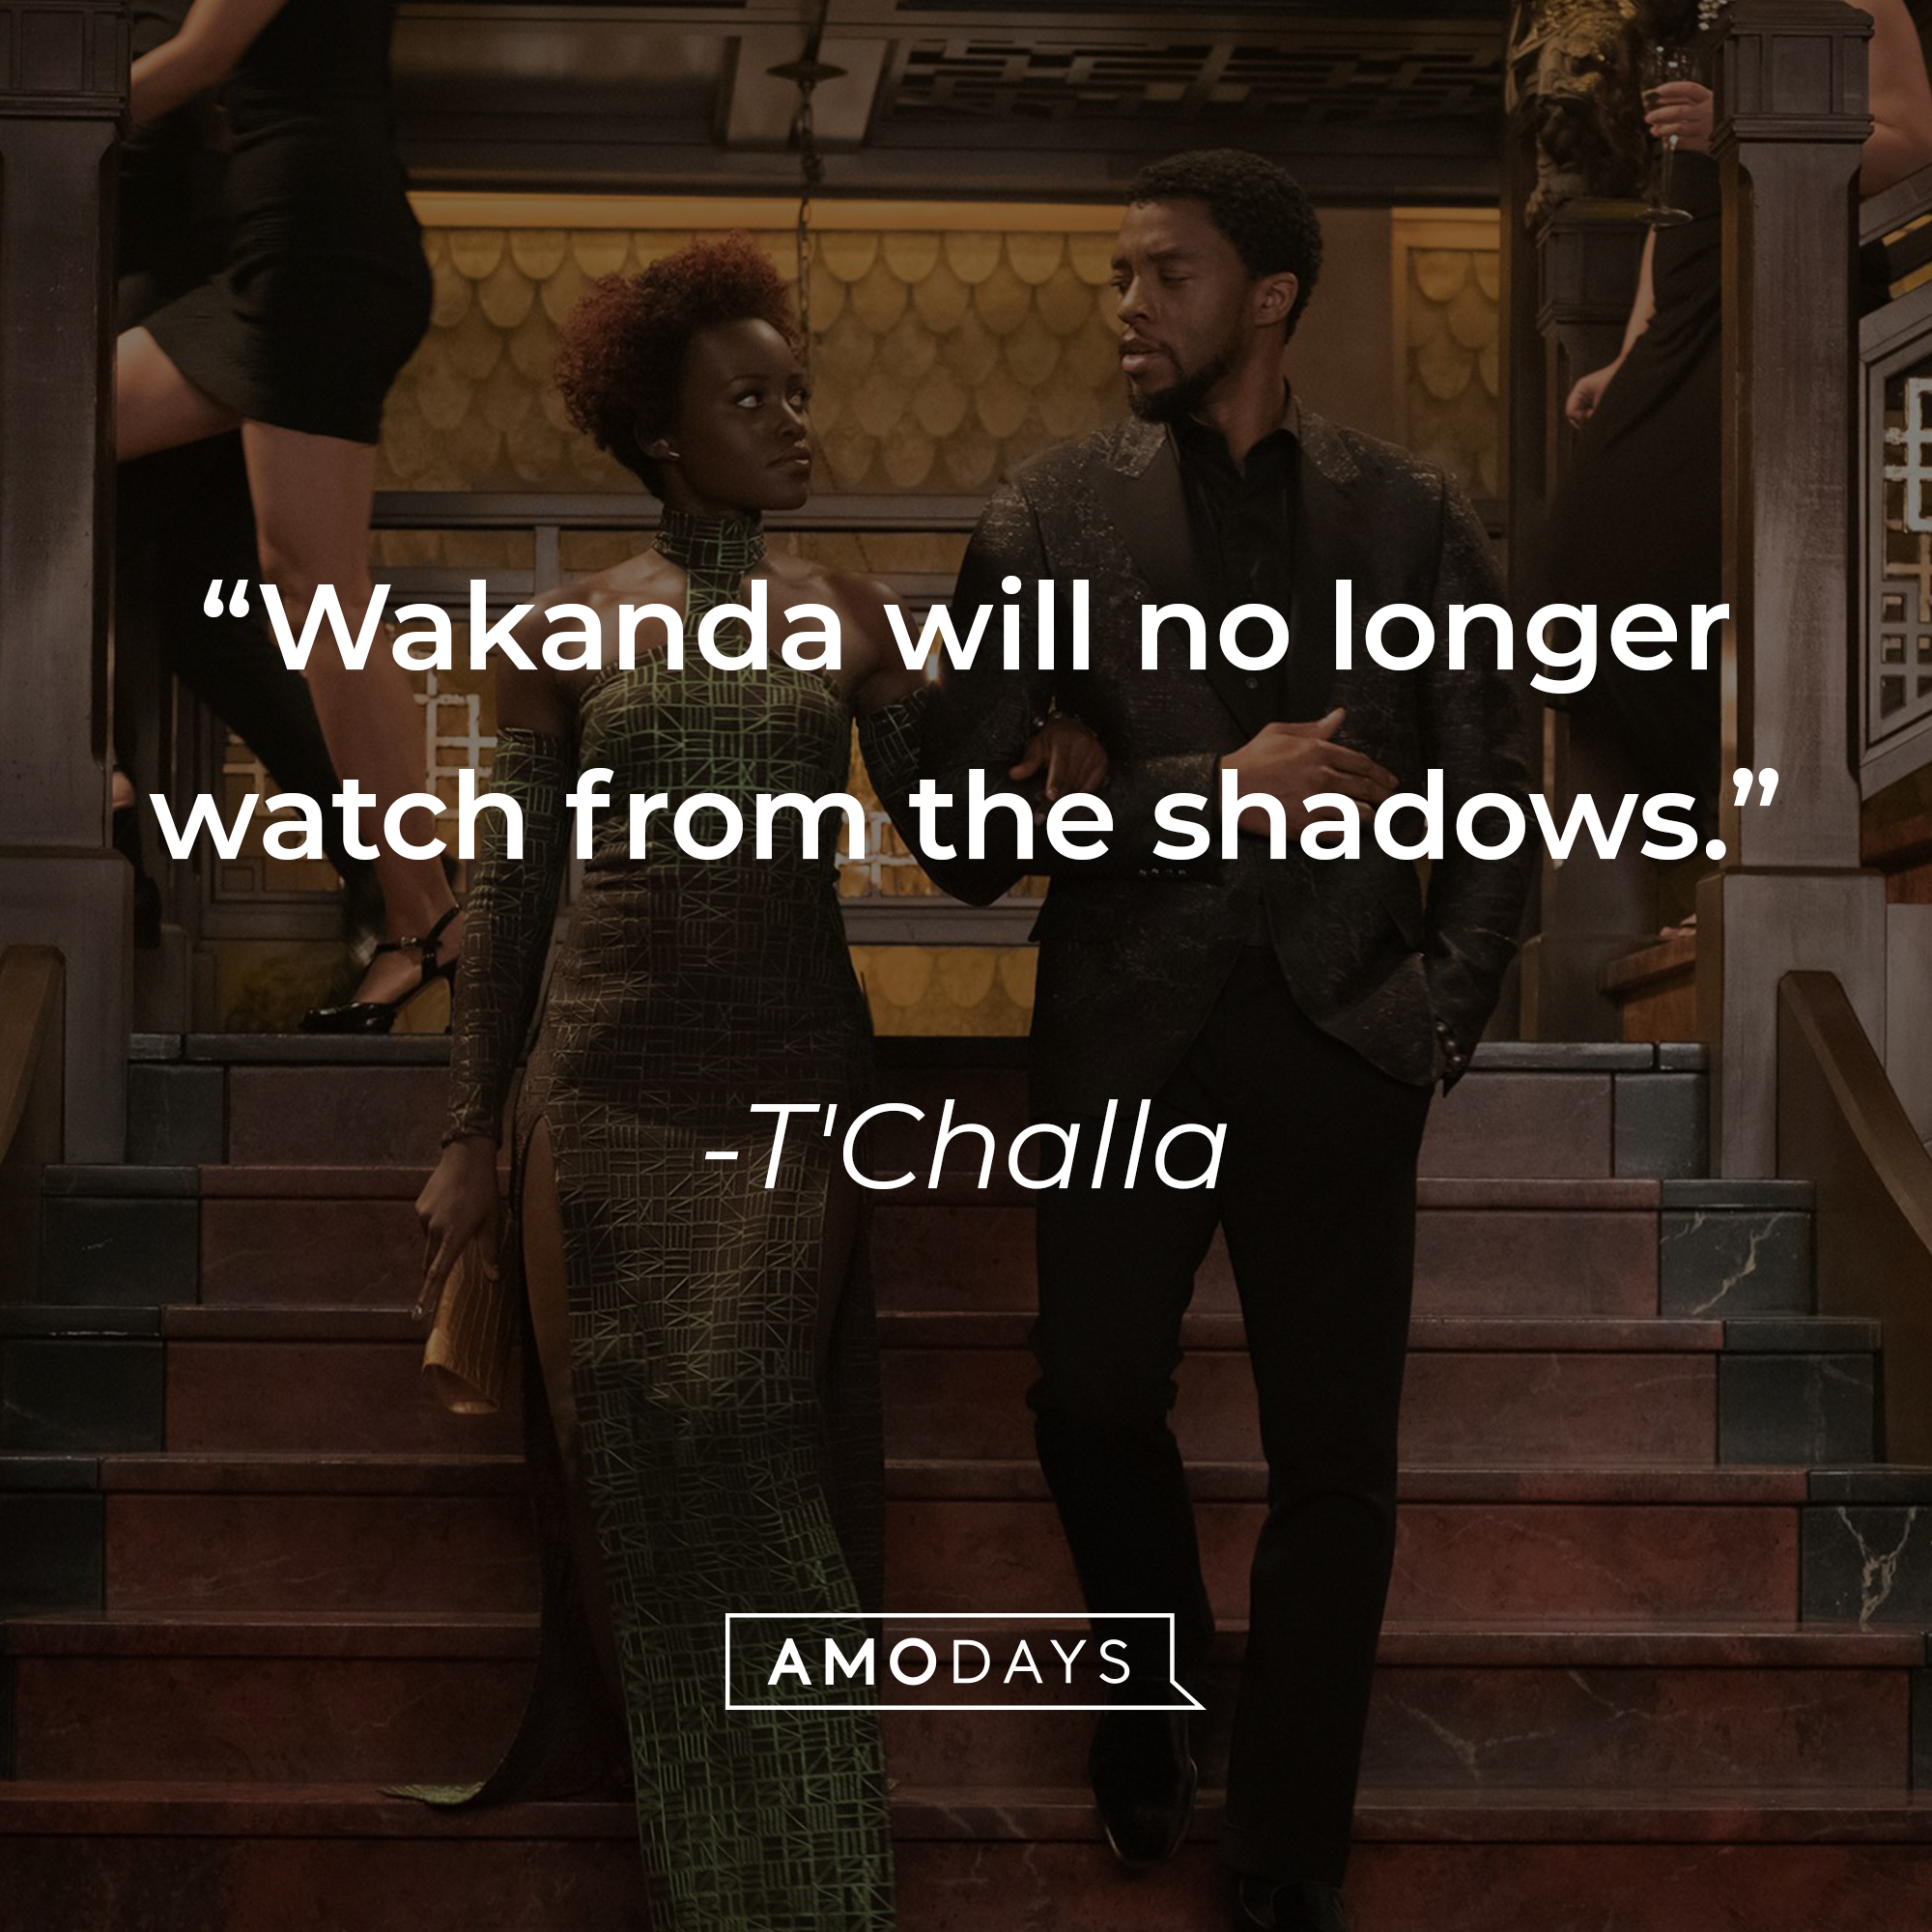 T'Challa's quote: “Wakanda will no longer watch from the shadows.” | Source: facebook.com/BlackPantherMovie